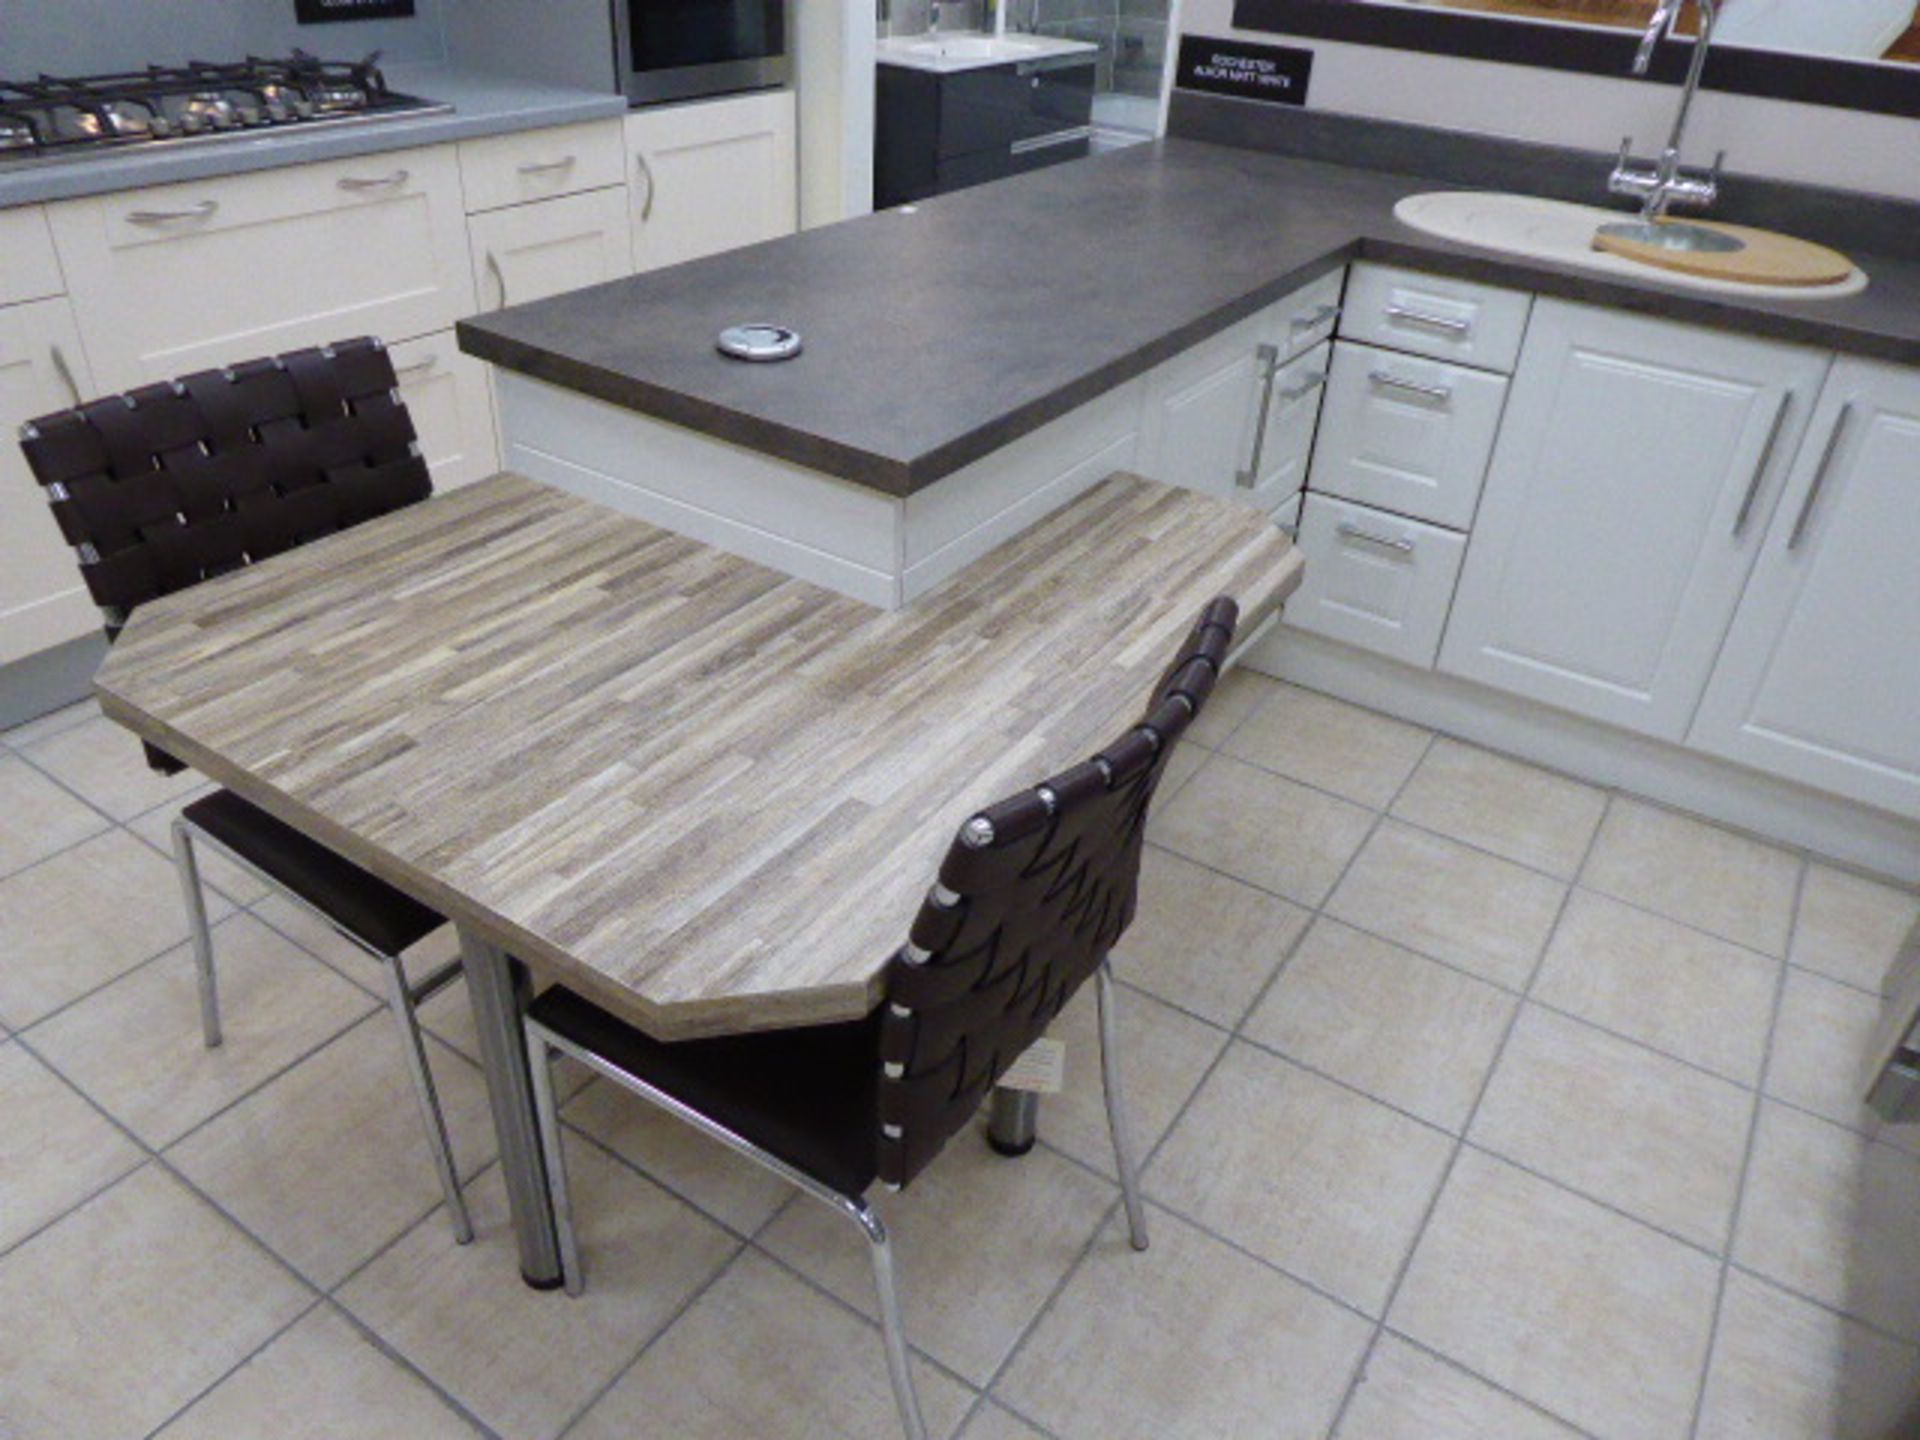 Rochester Alkor matte white kitchen with sand stone effect laminate worktops and block wood effect - Image 6 of 7